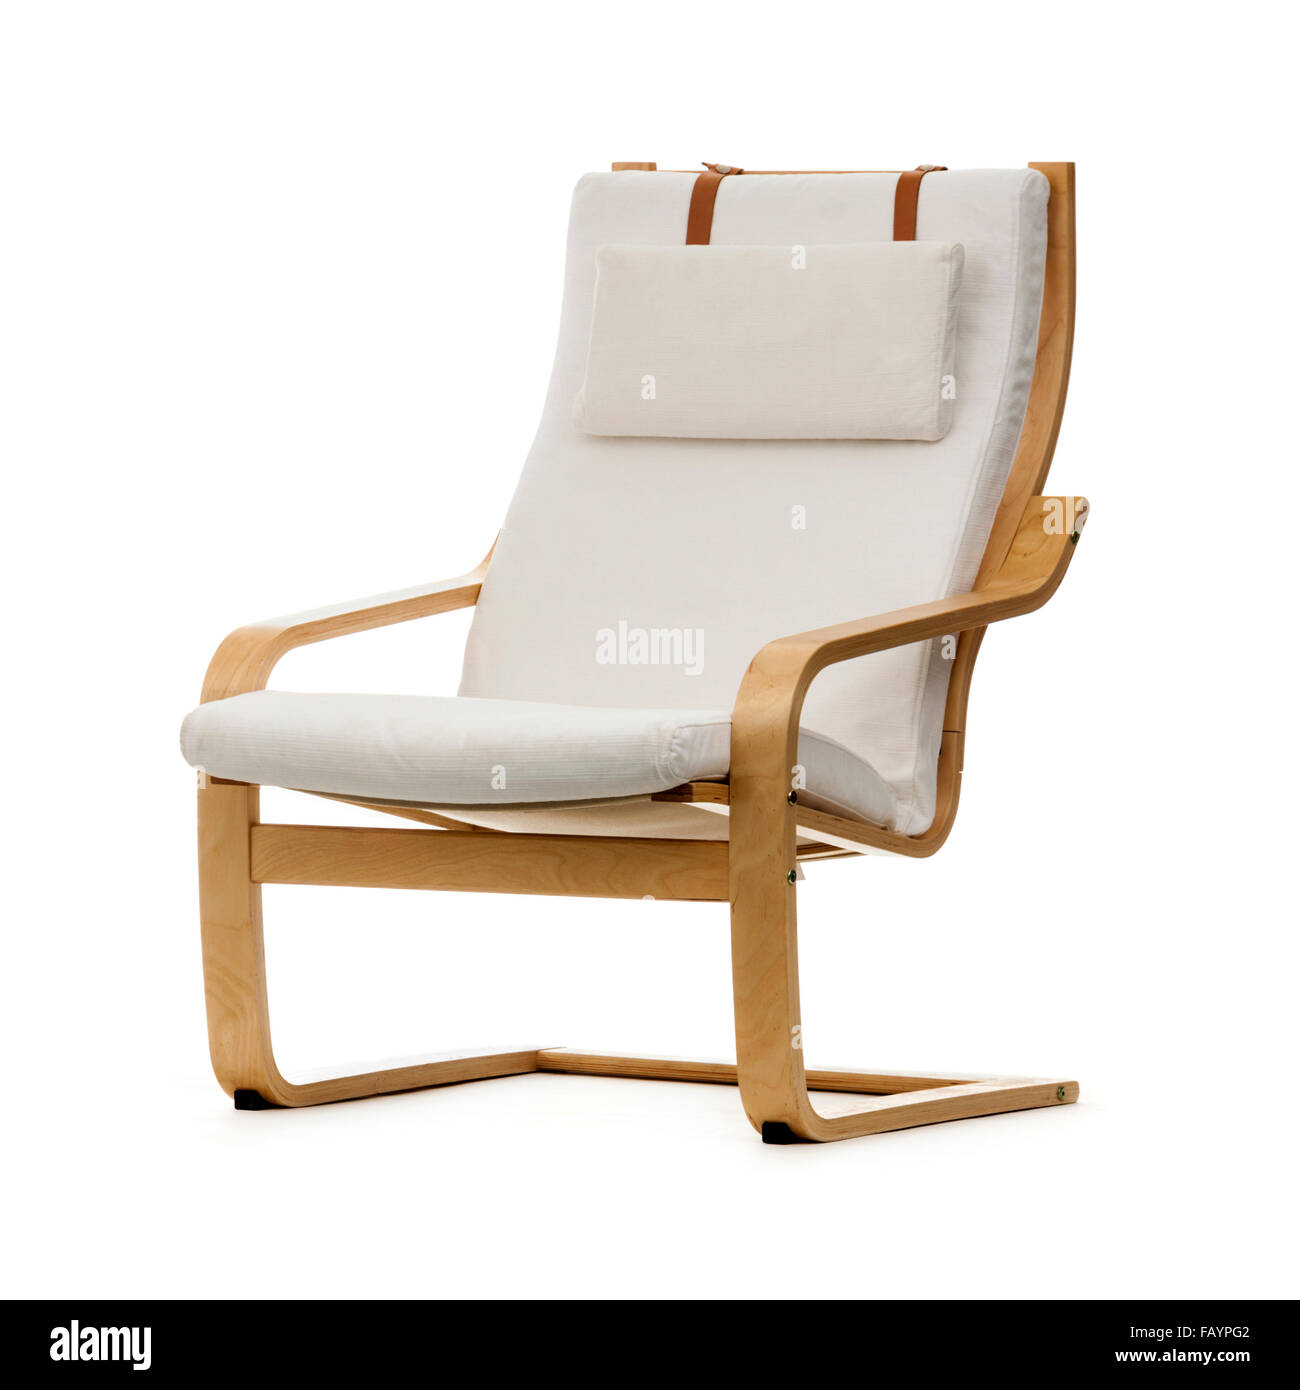 Ikea Poang Chair Introduced In 1977 As The Poem And Renamed To